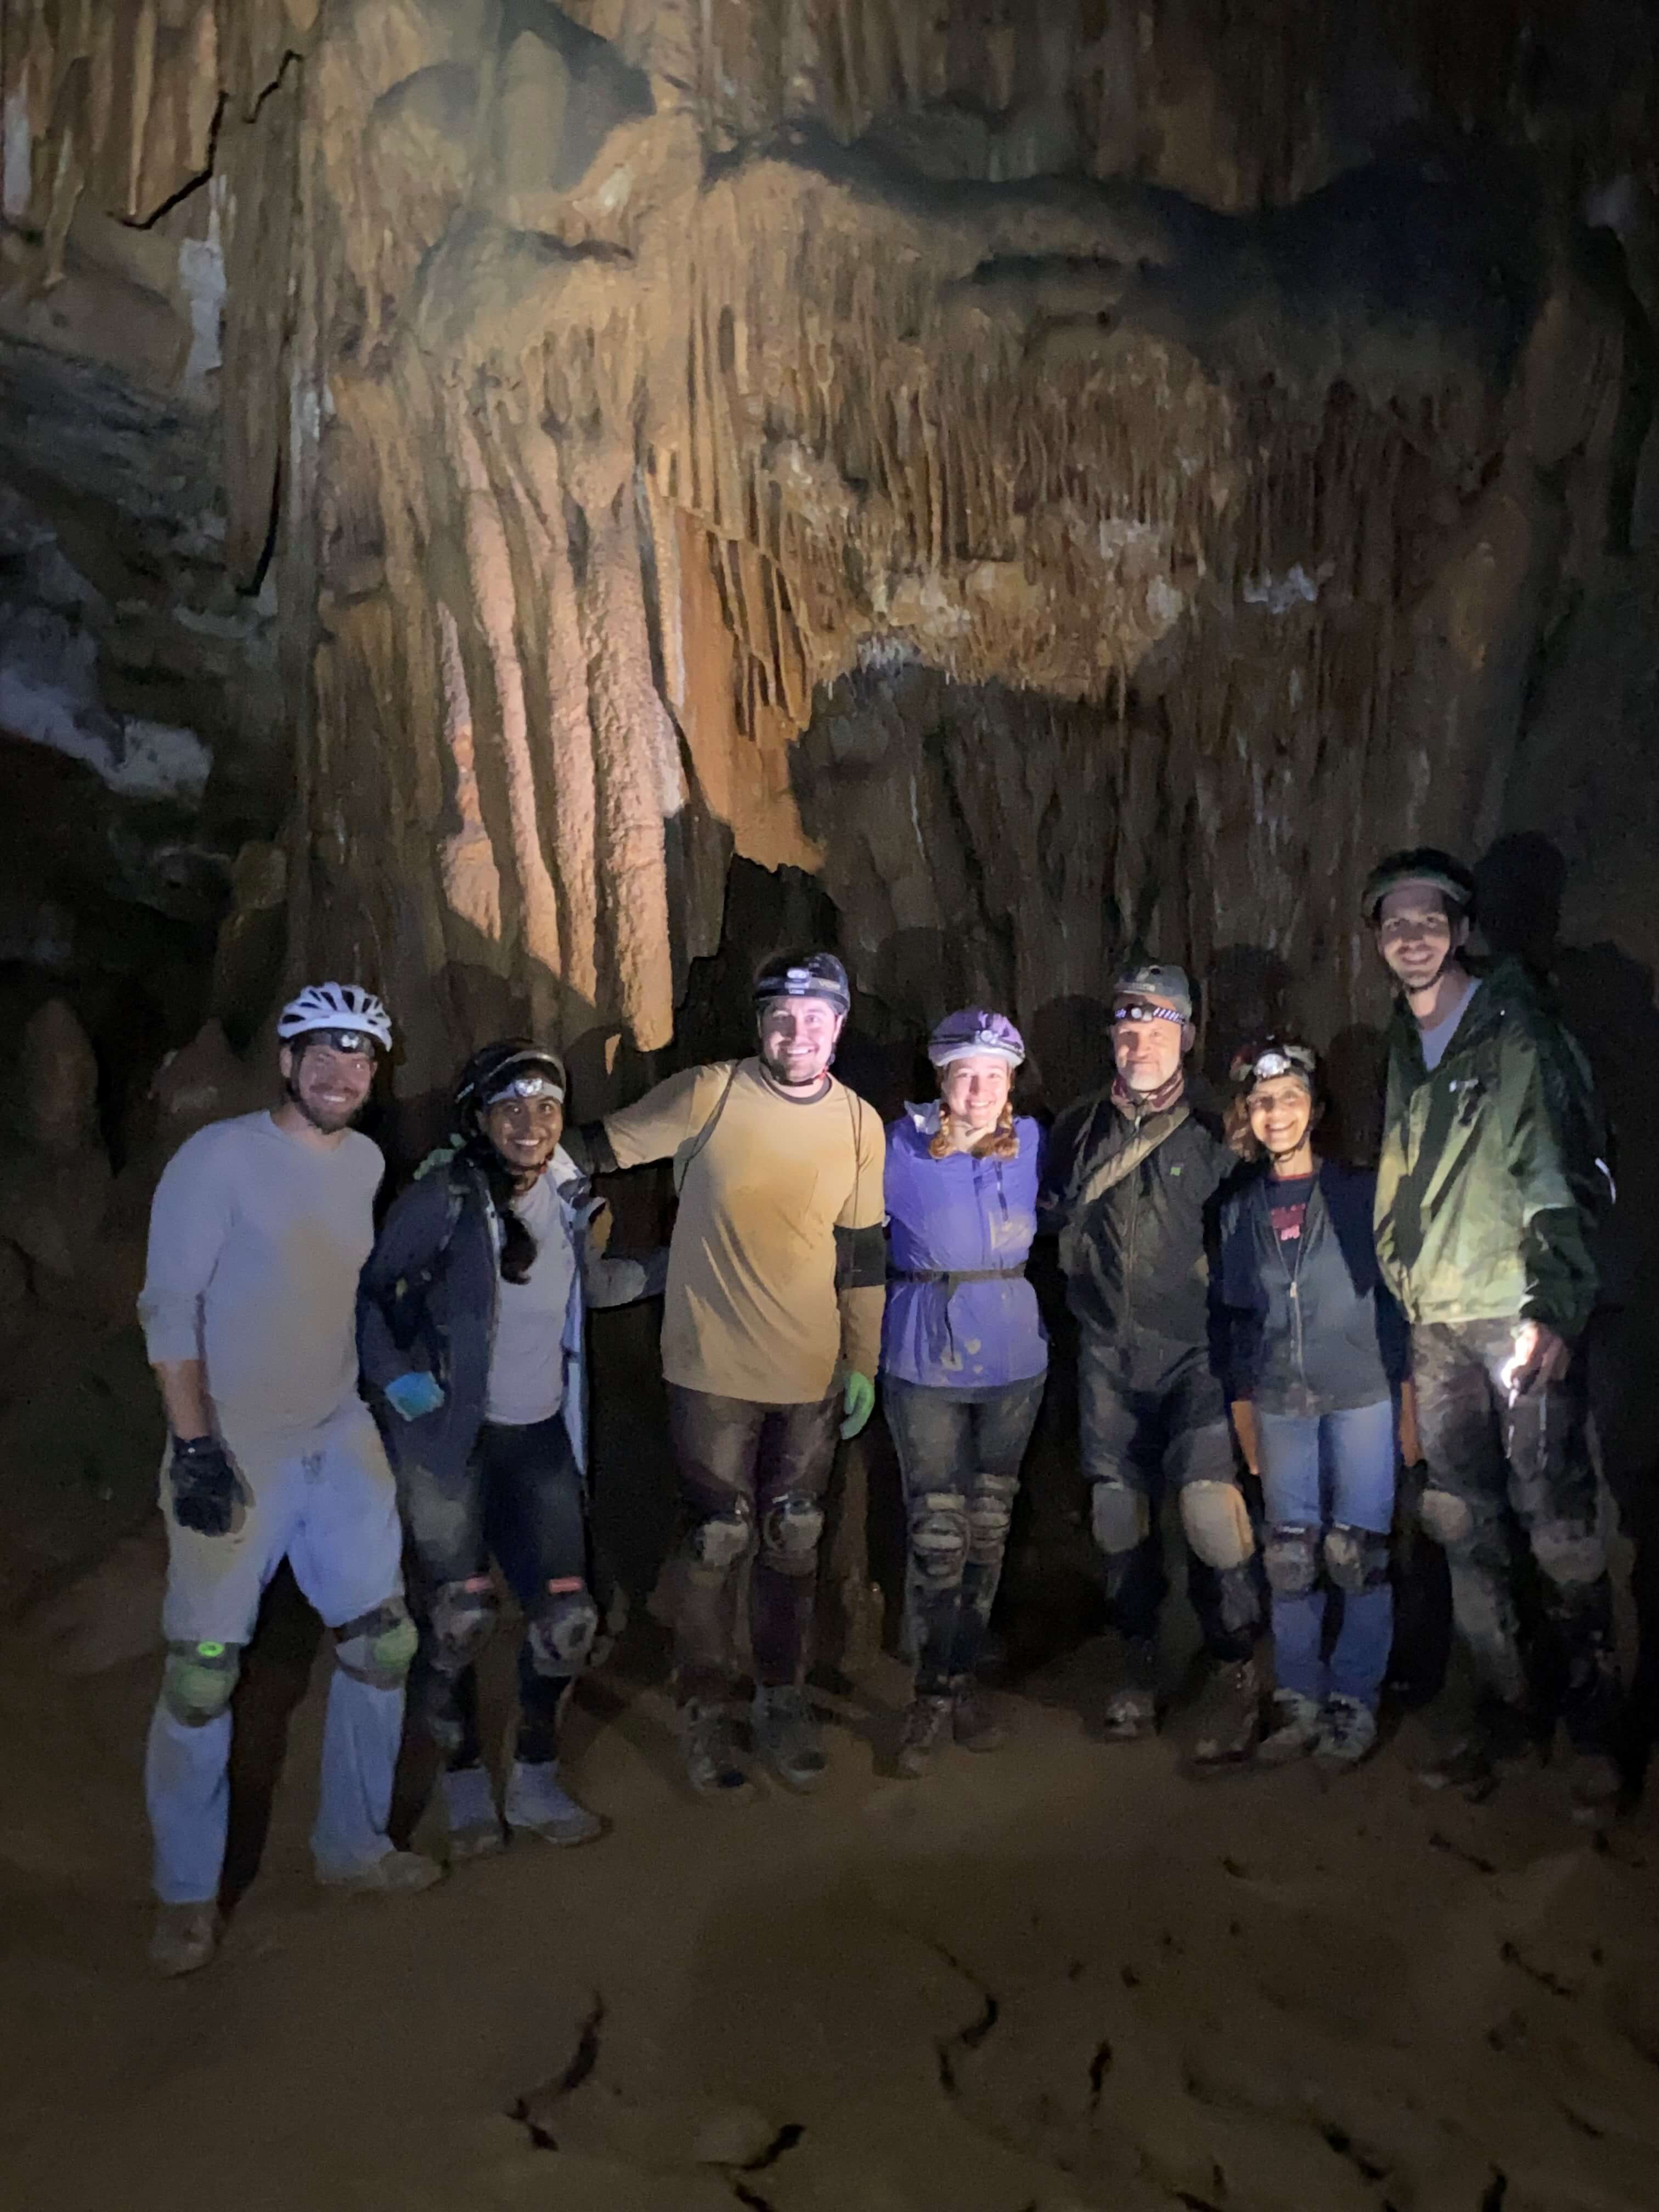 Spelunking Group in Cave.